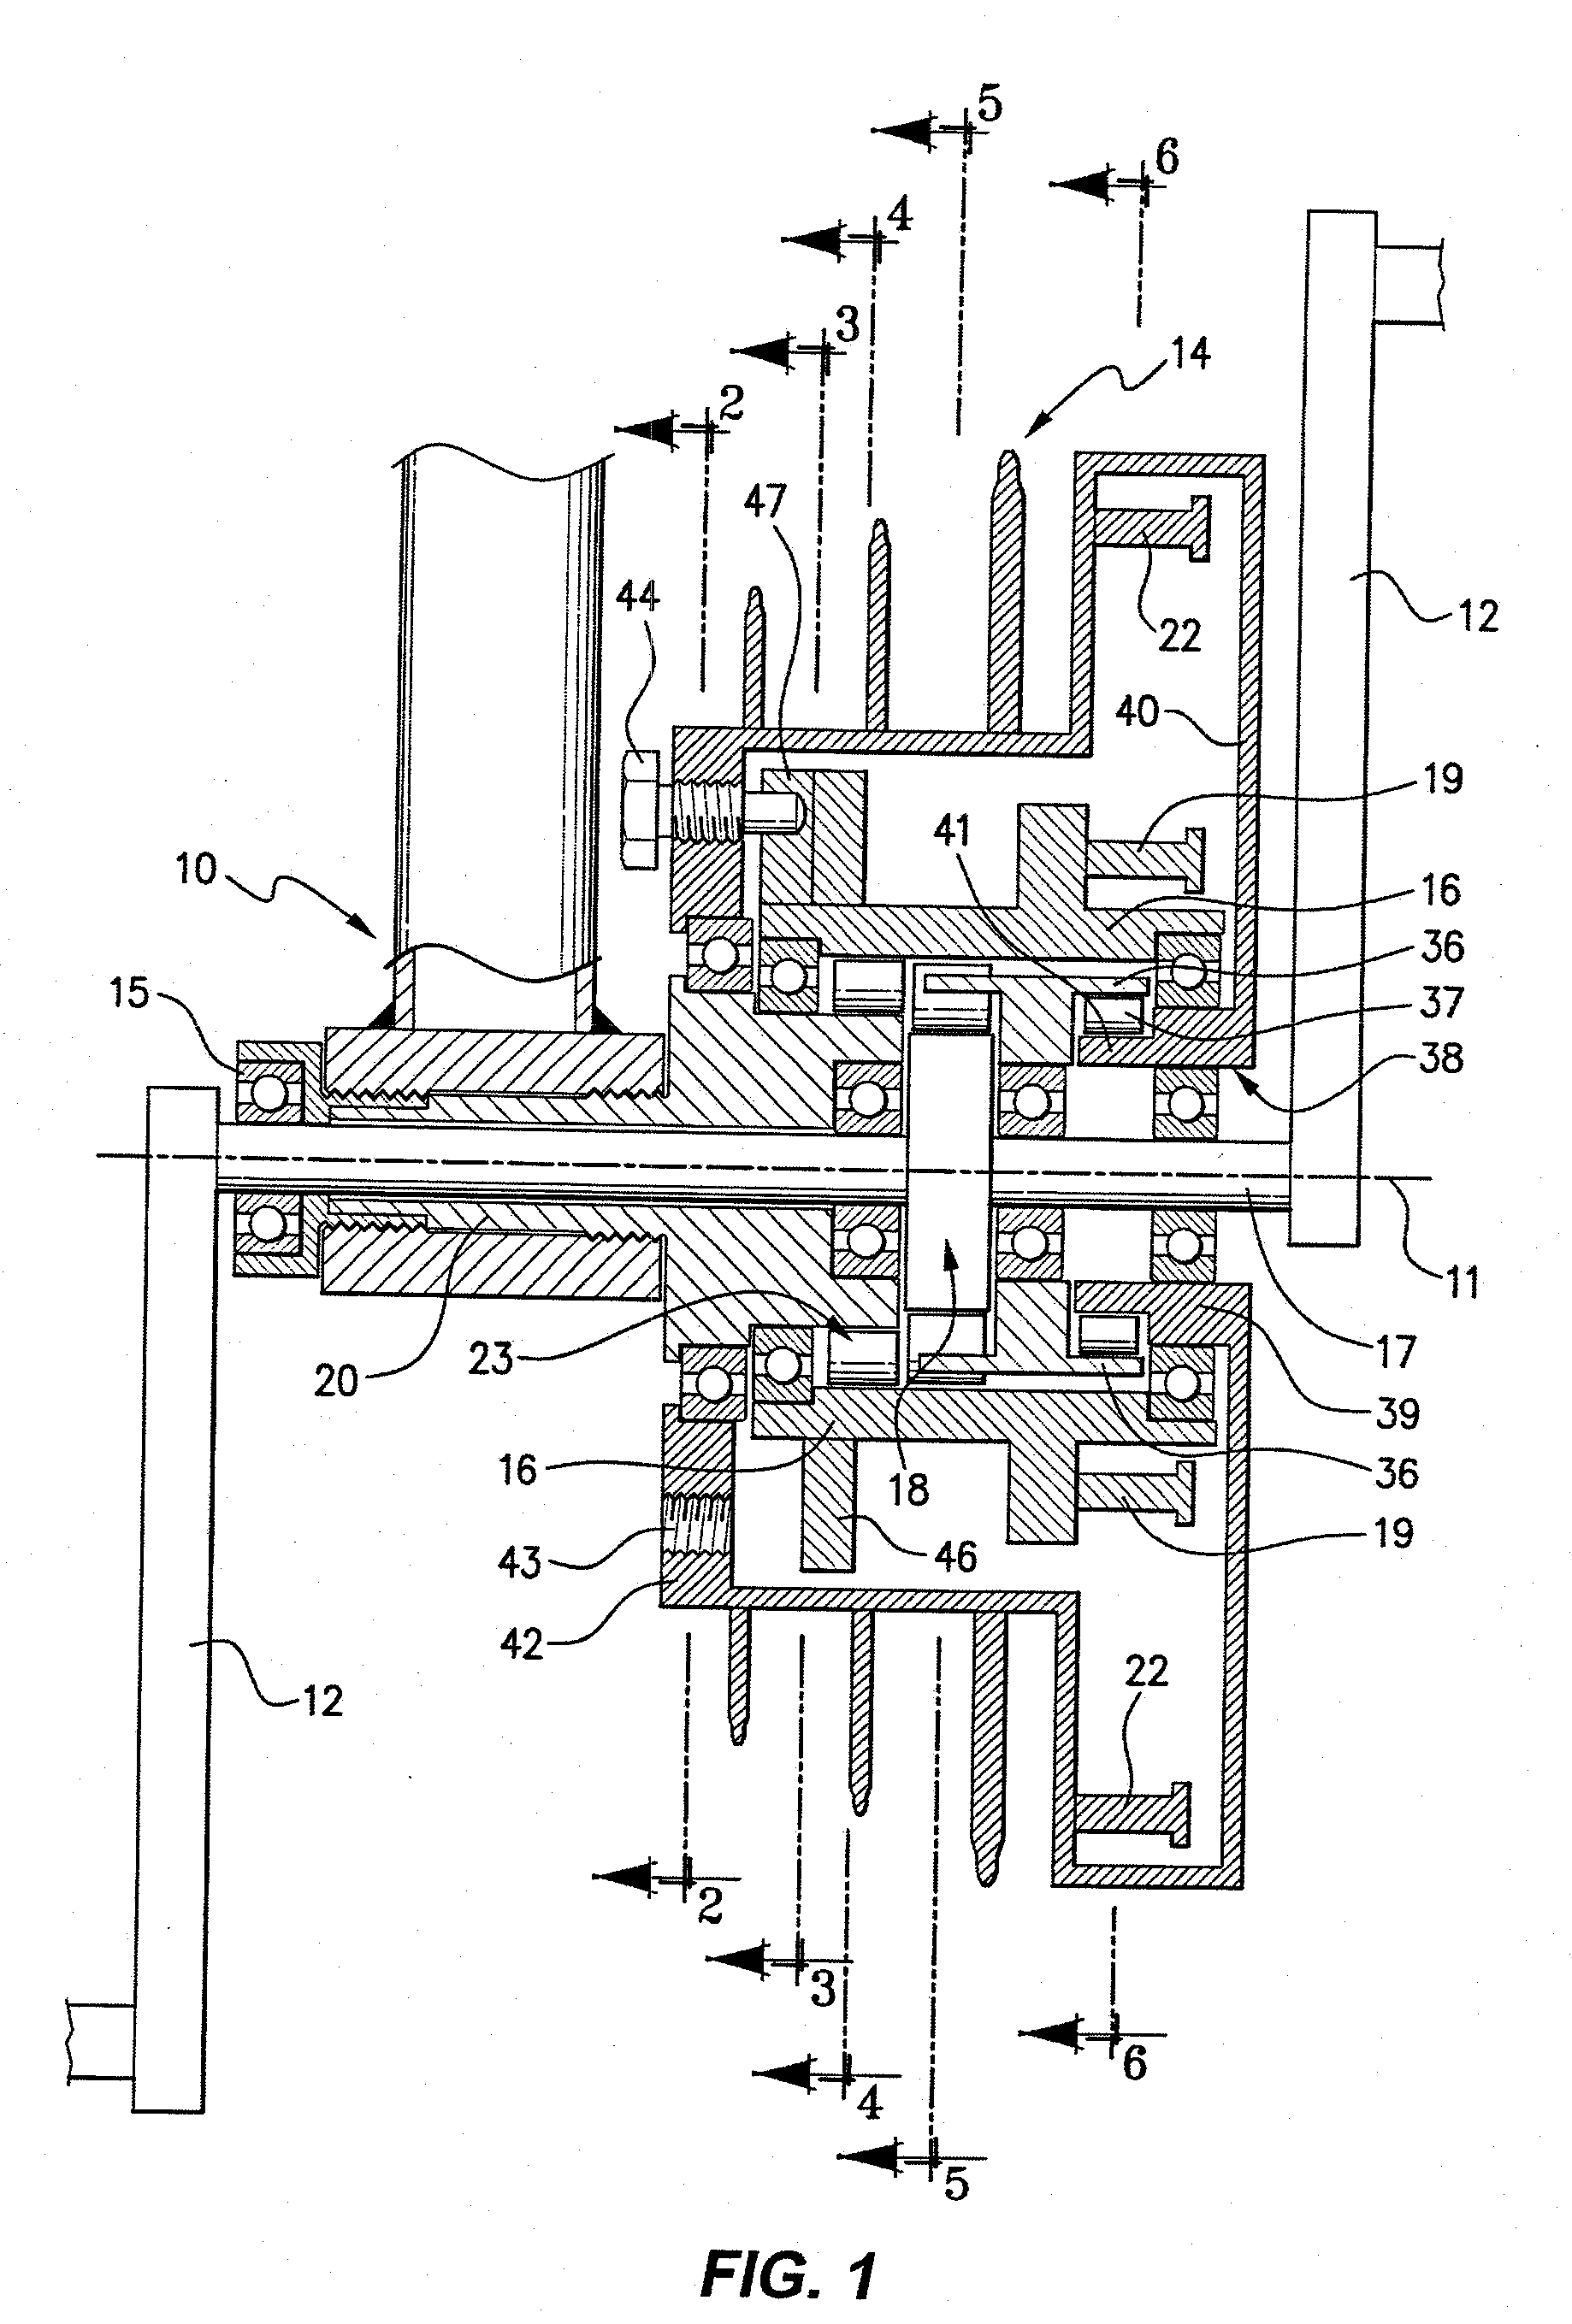 Human Energy Transduction and Storage System Having a One-Way Clutch